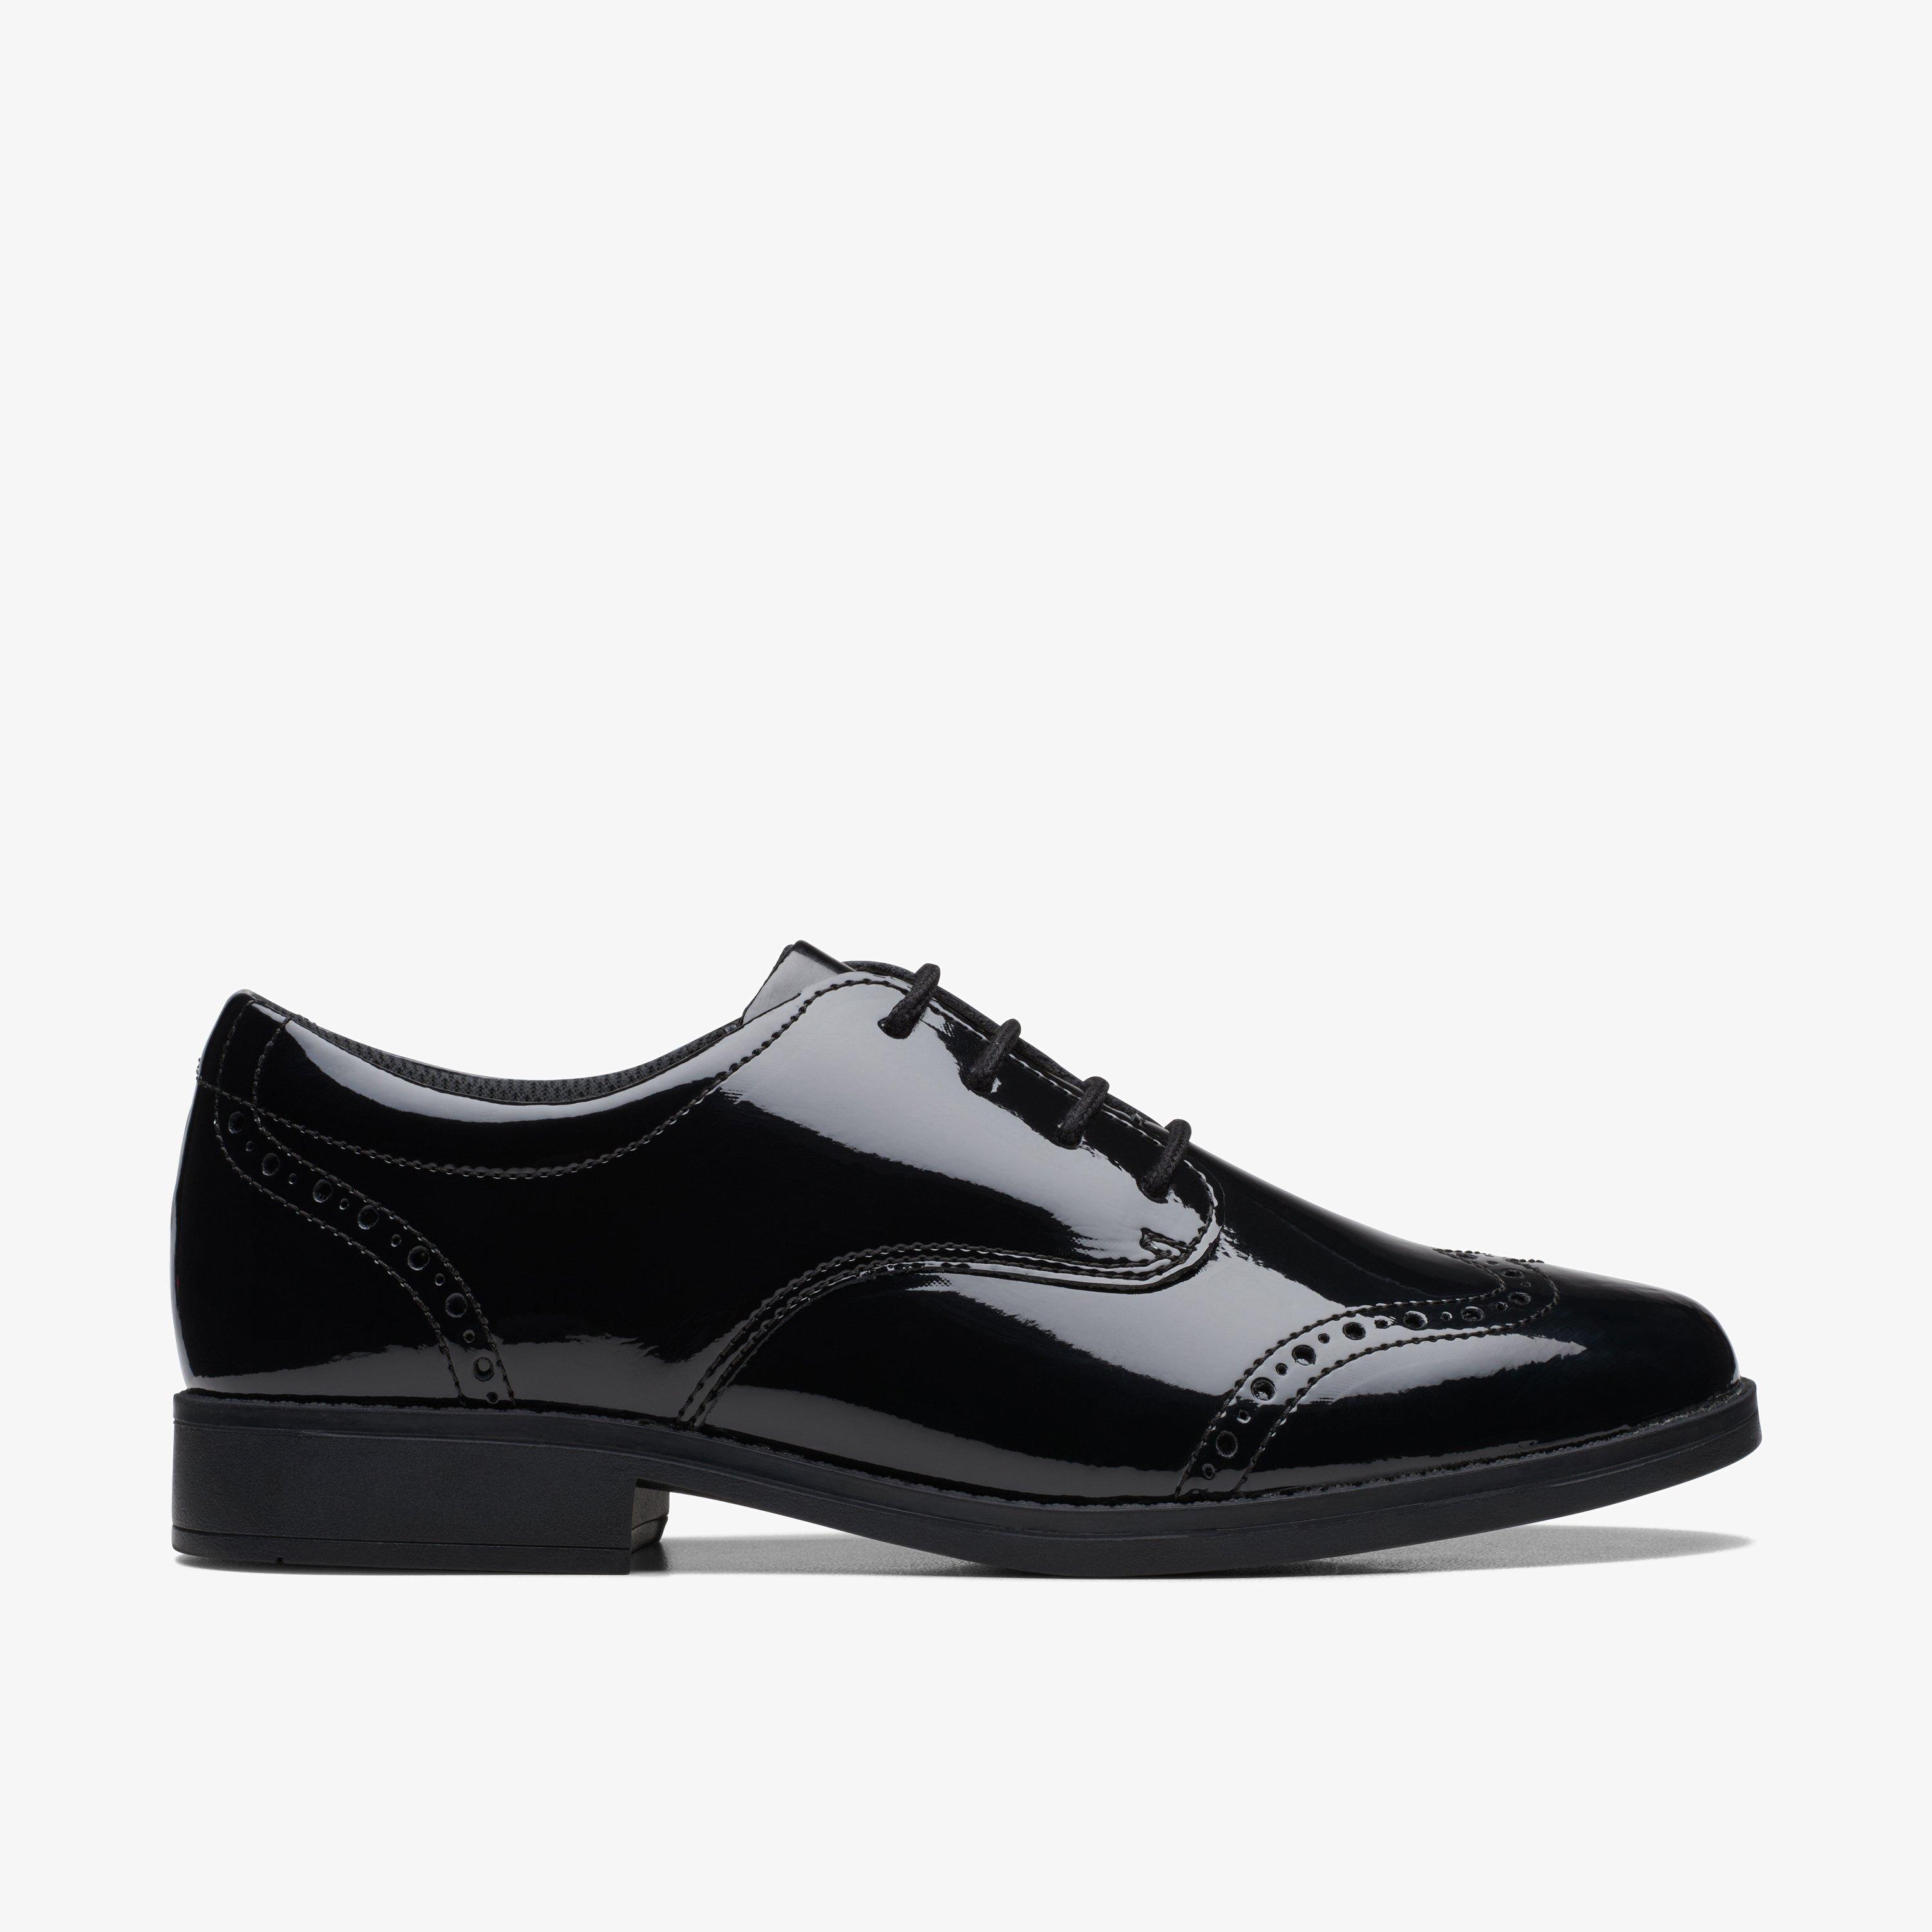 GIRLS Sami Walk Youth Black Patent Brogues | Clarks Outlet